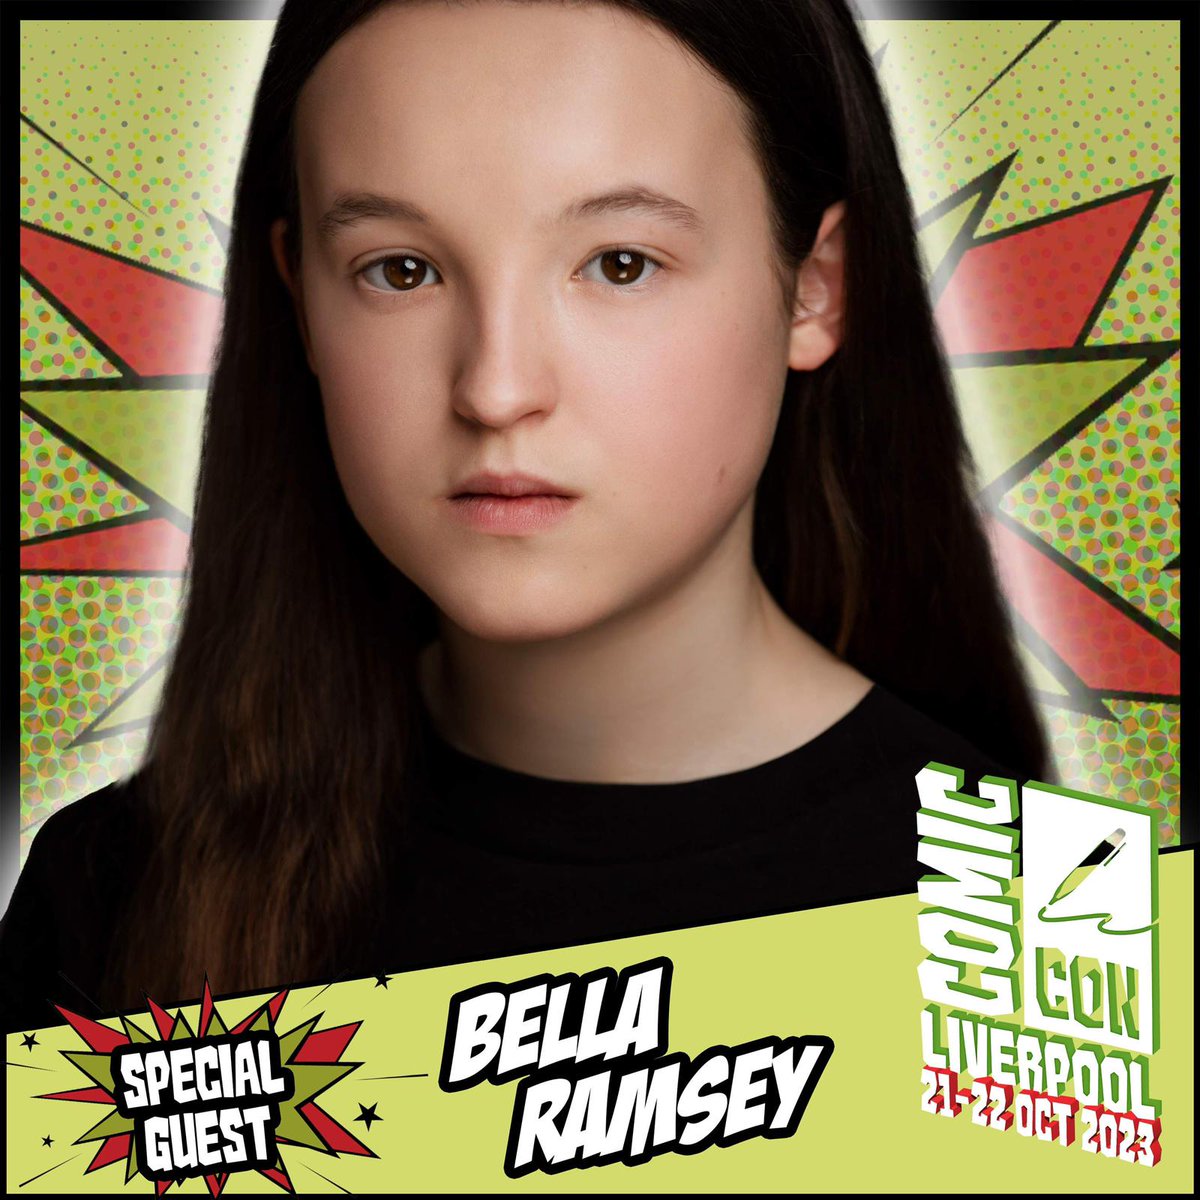 Guest Announcement 

Bella Ramsey 

Joining us for #ComicConLiverpool is @BellaRamsey 

Bella plays Ellie on #TheLastOfUs and has also appeared in #GameofThrones and #TheWorstWitch

Tickets for #BellaRamsey -

comicconventionliverpool.co.uk/tickets

#ComicCon #Liverpool